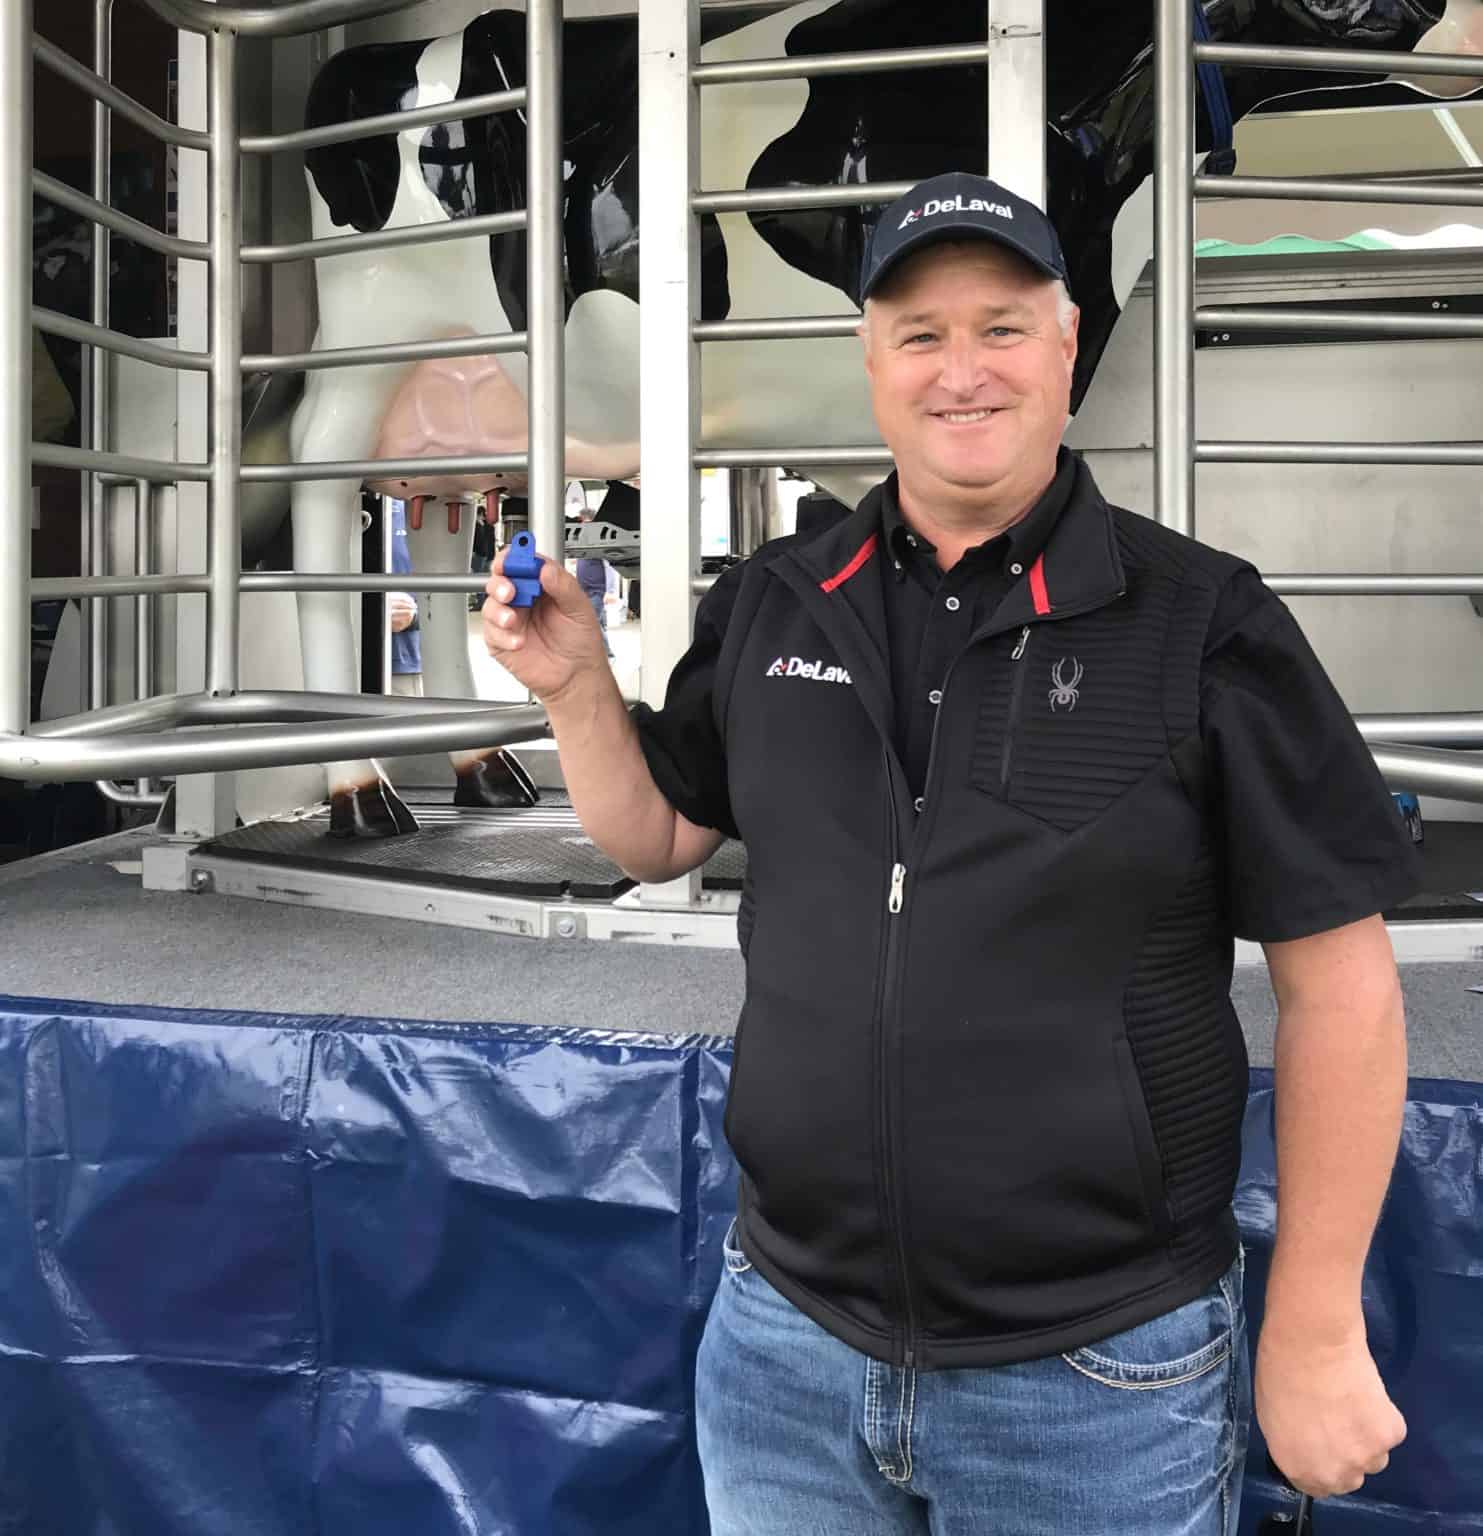 New dairy innovations featured at Canada’s Outdoor Farm Show